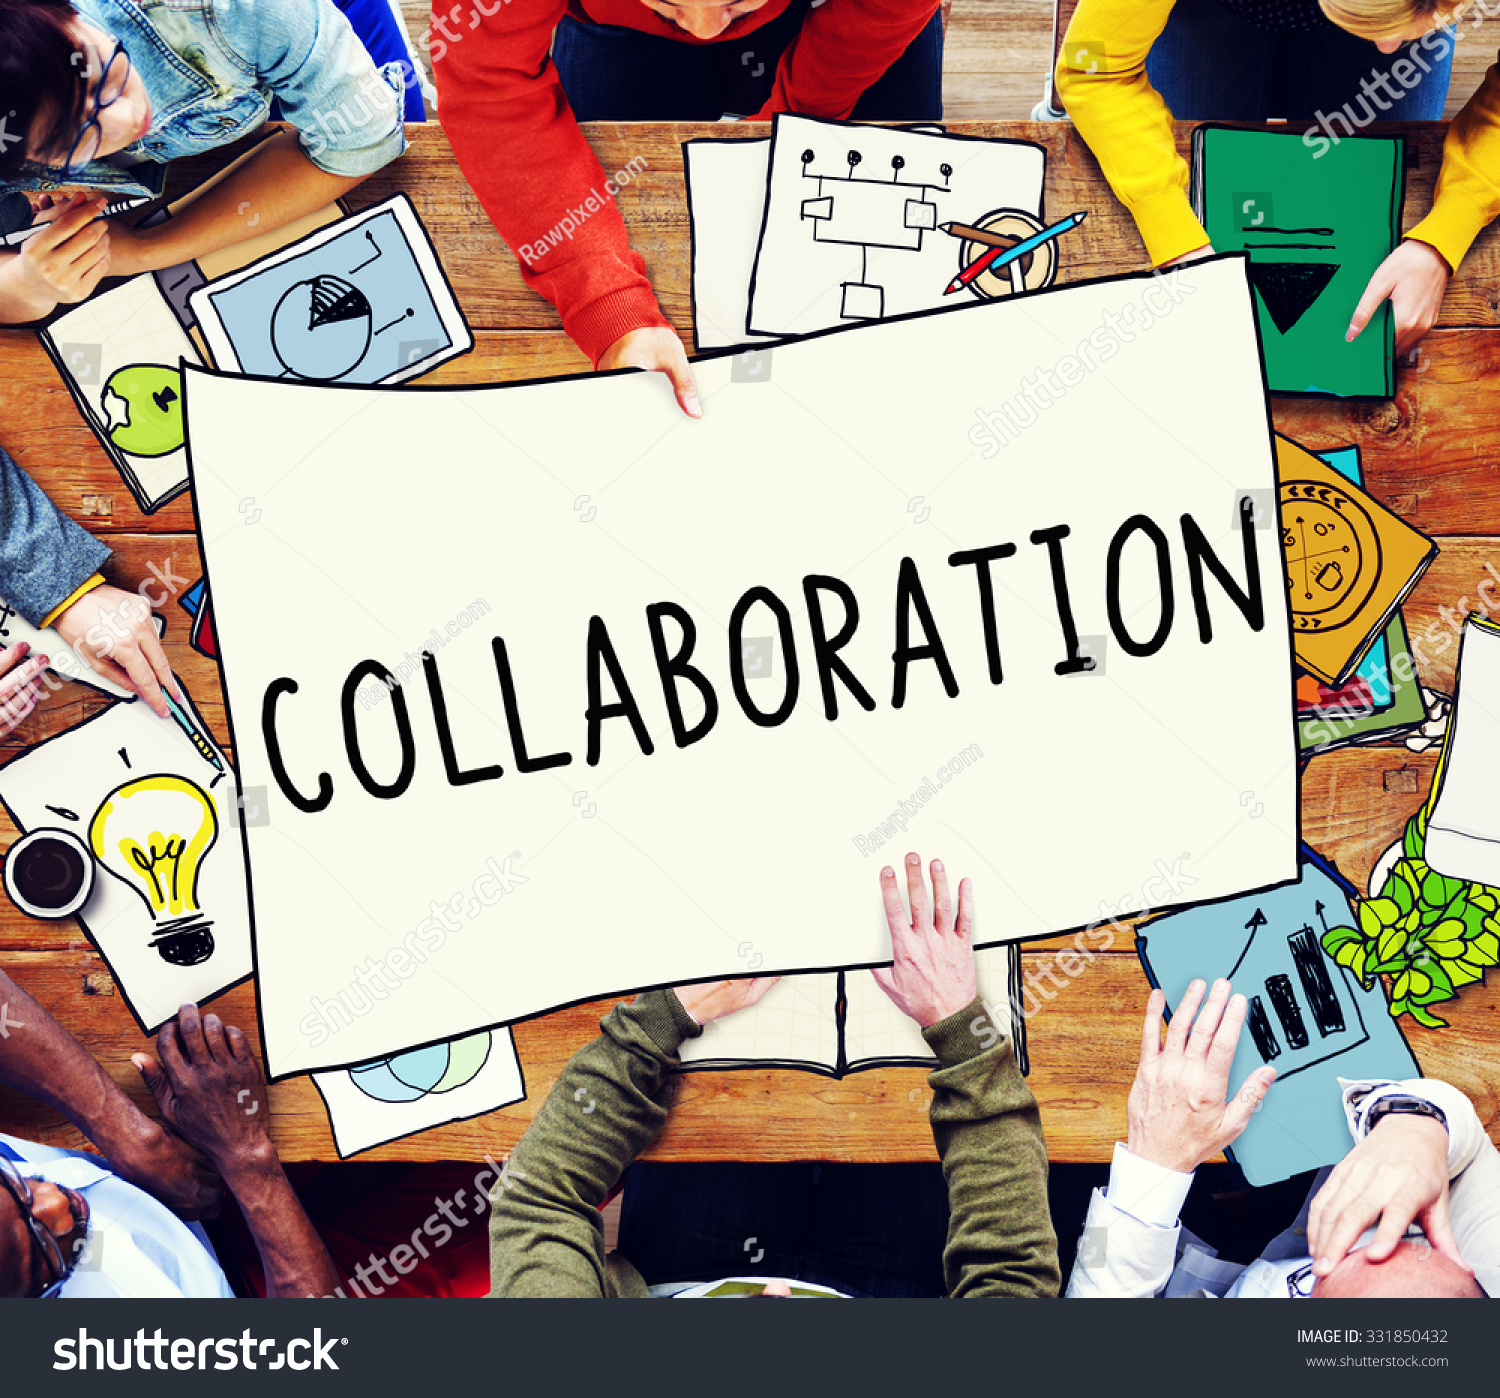 The Concept Of Collaboration Within The Organization